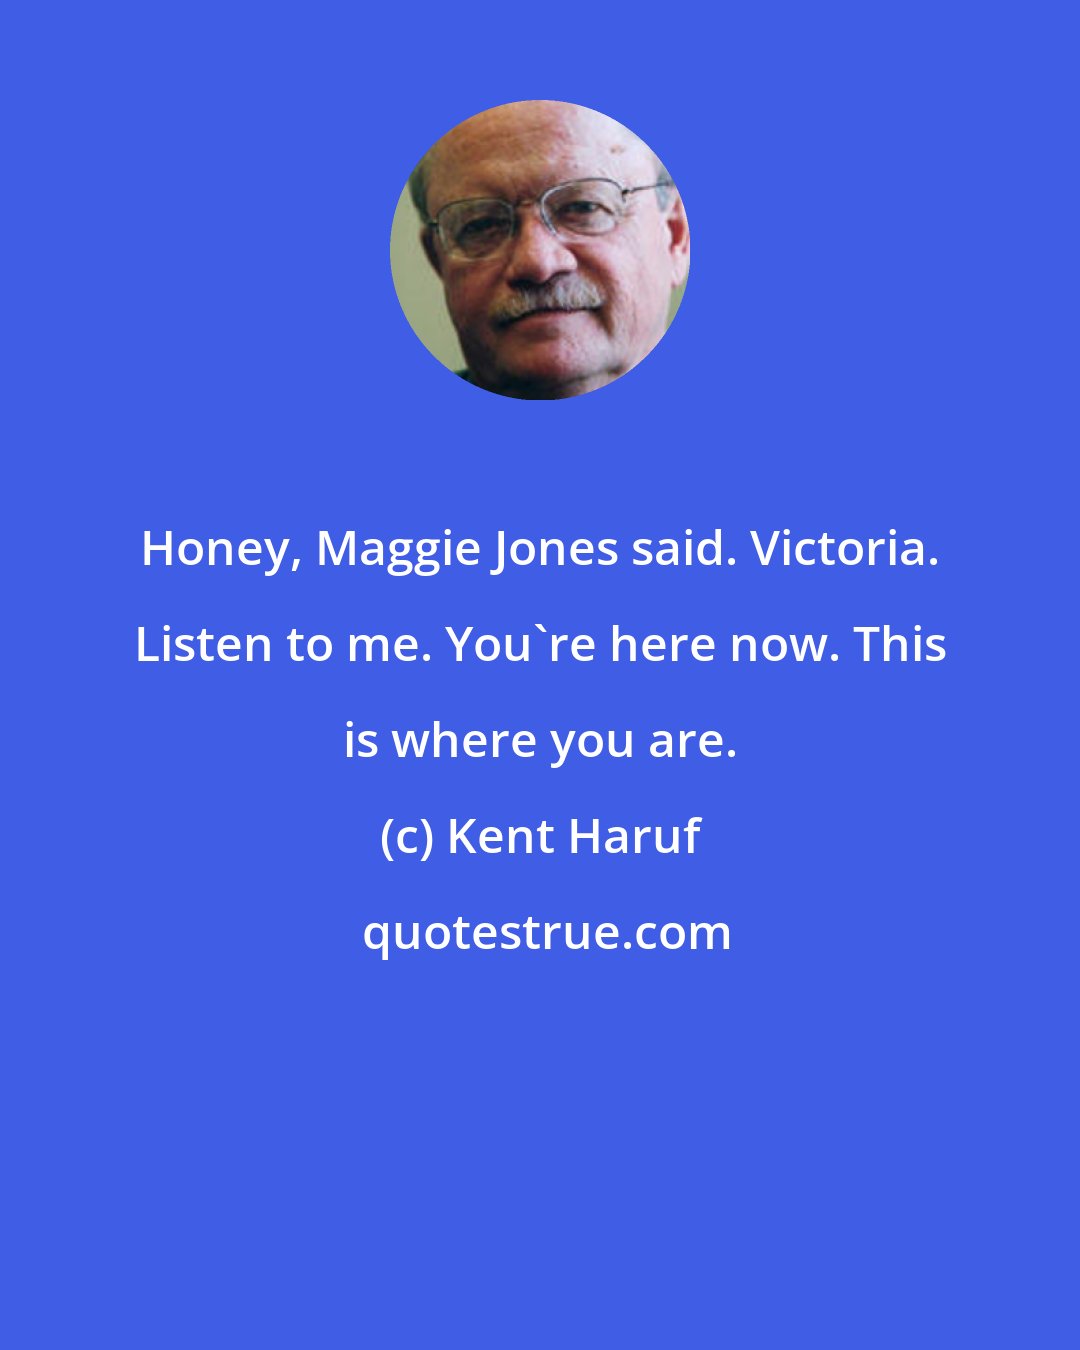 Kent Haruf: Honey, Maggie Jones said. Victoria. Listen to me. You're here now. This is where you are.